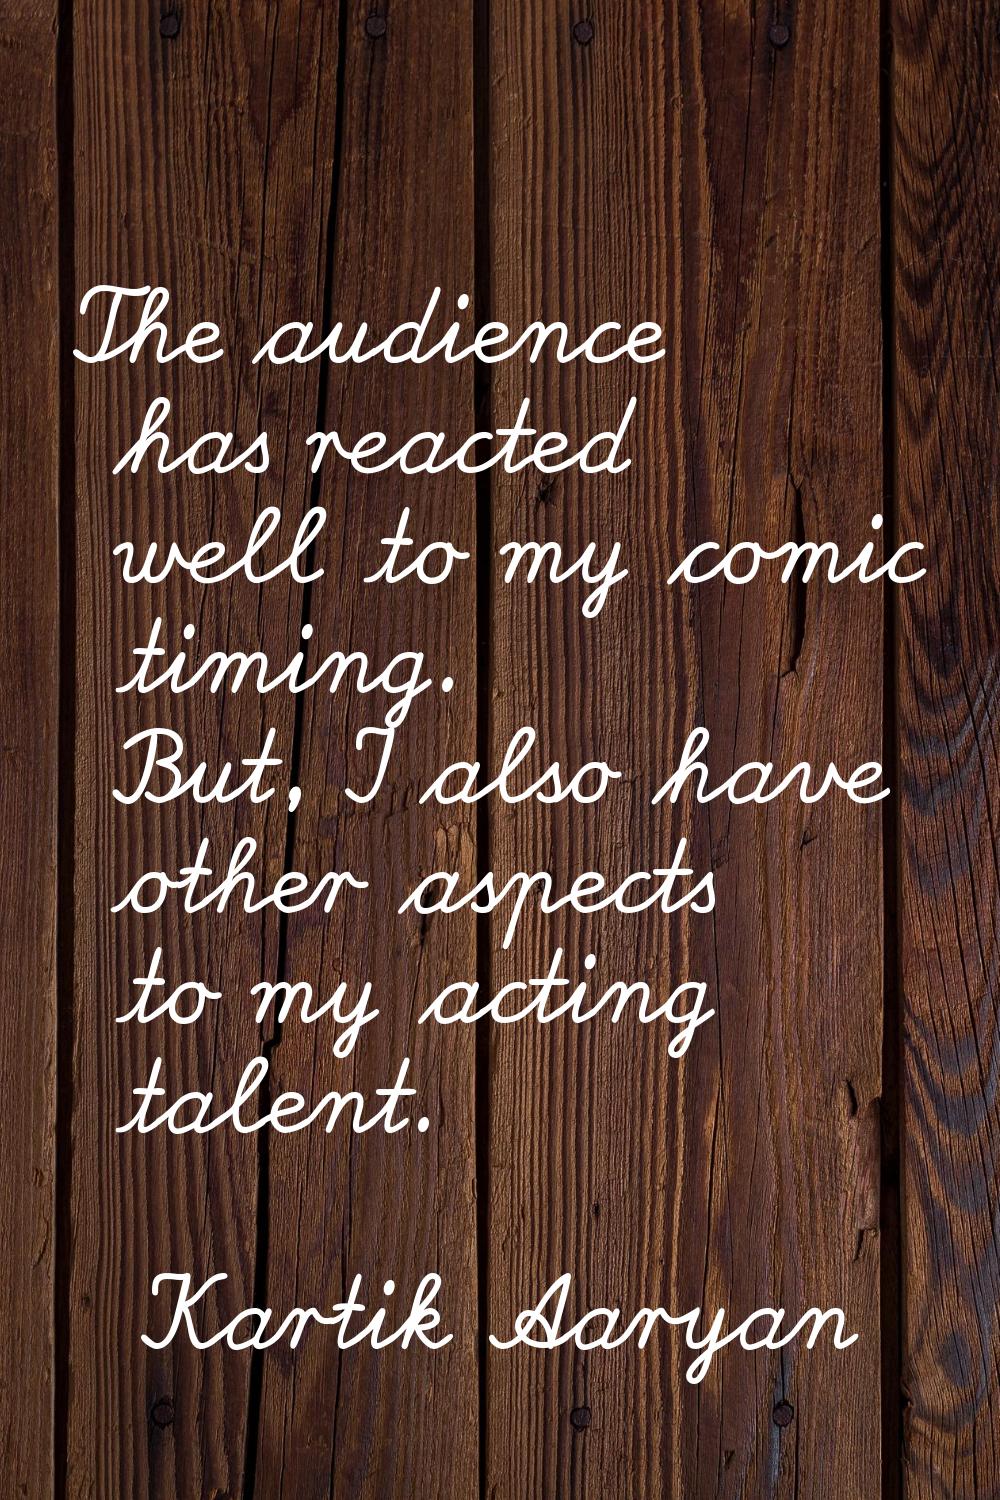 The audience has reacted well to my comic timing. But, I also have other aspects to my acting talen